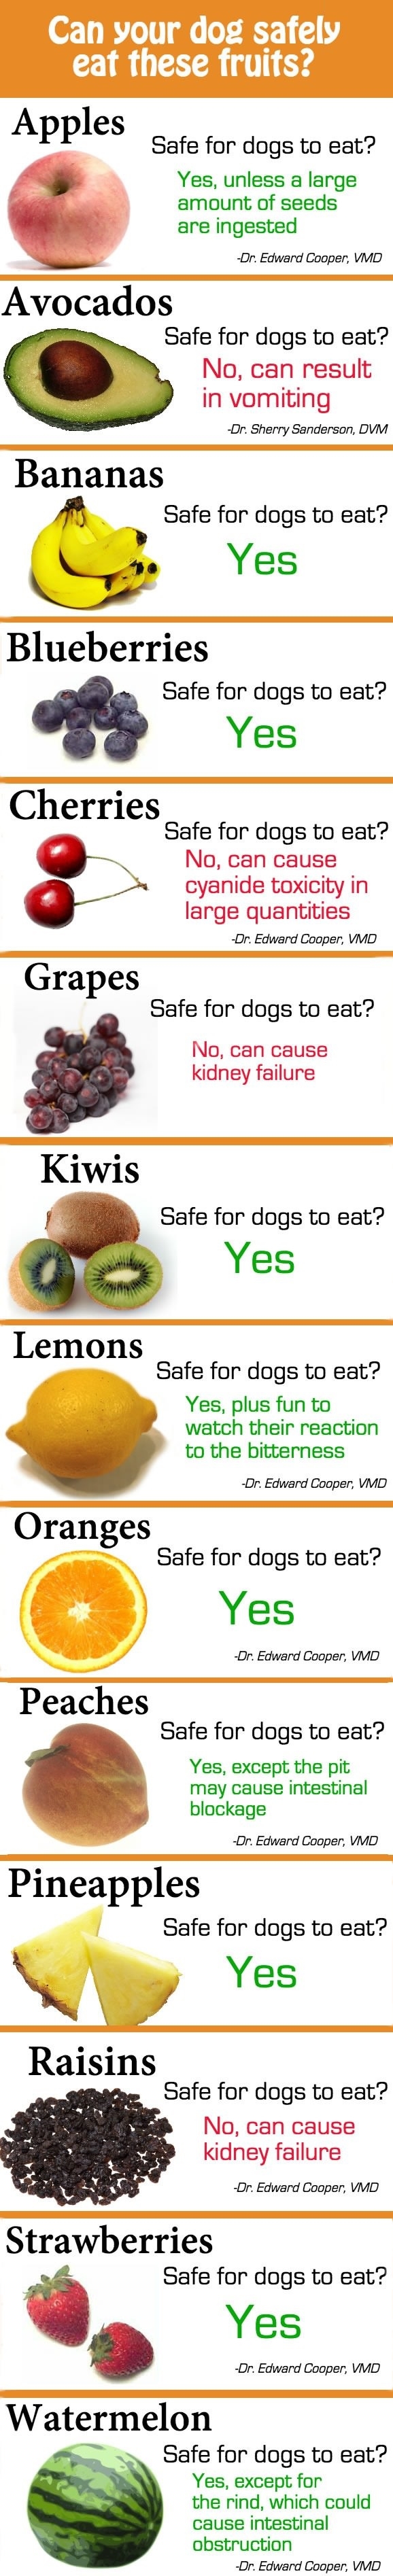 Can your dog eat fruits?